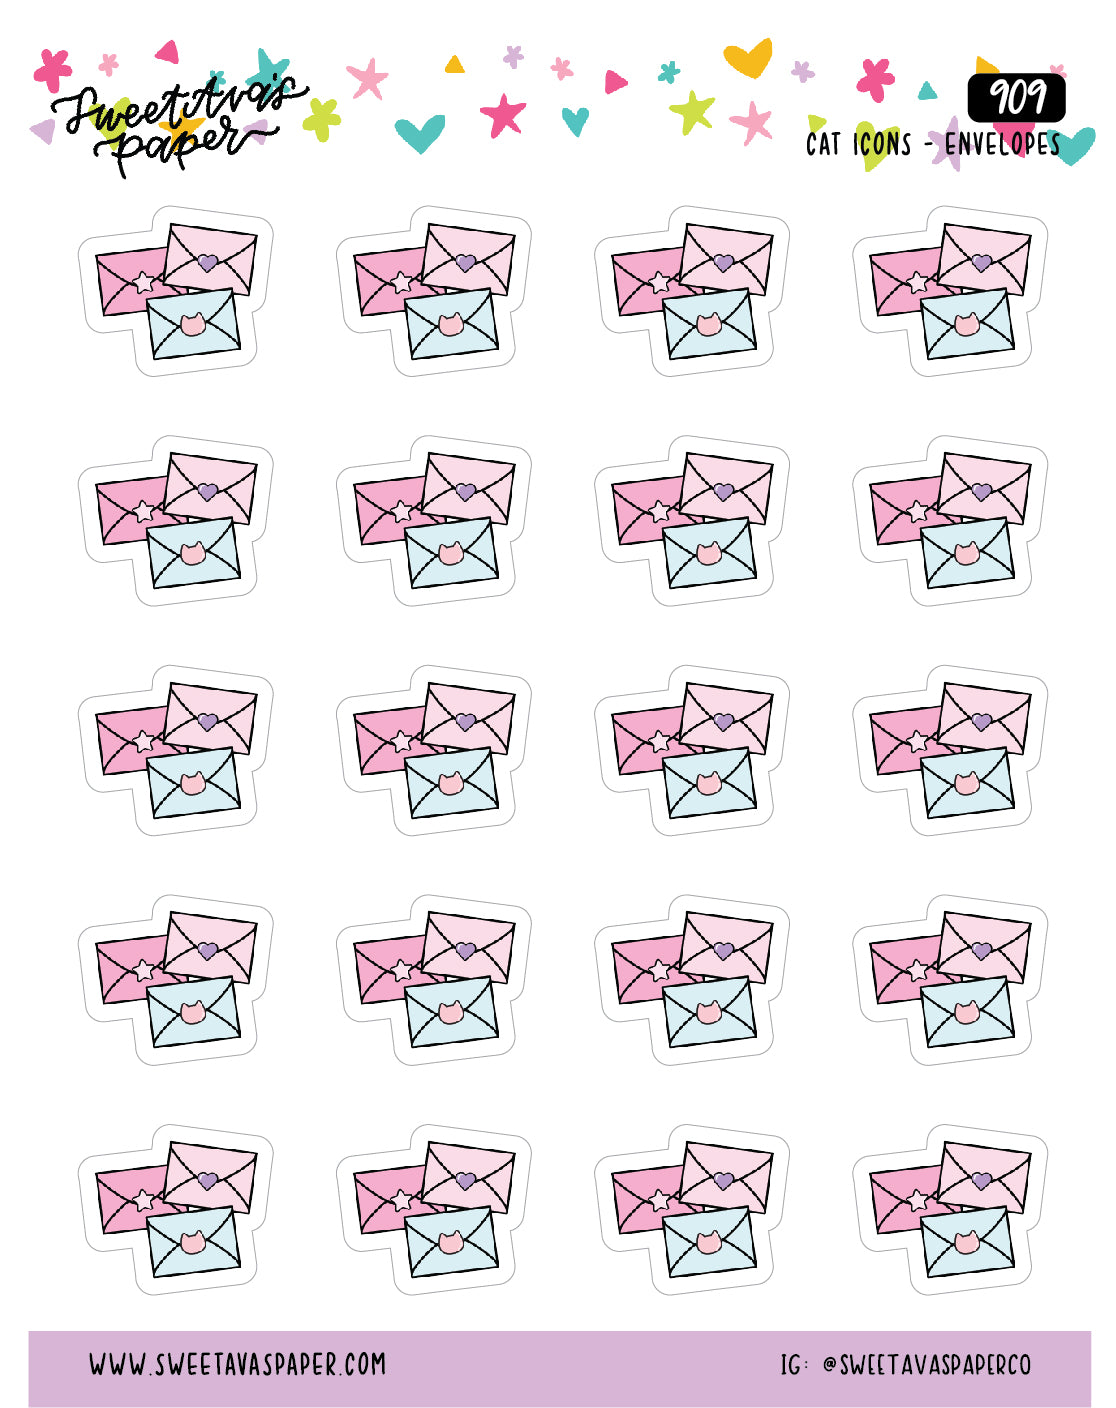 Envelopes Planner Stickers - Cat Shaped Icons - [909]